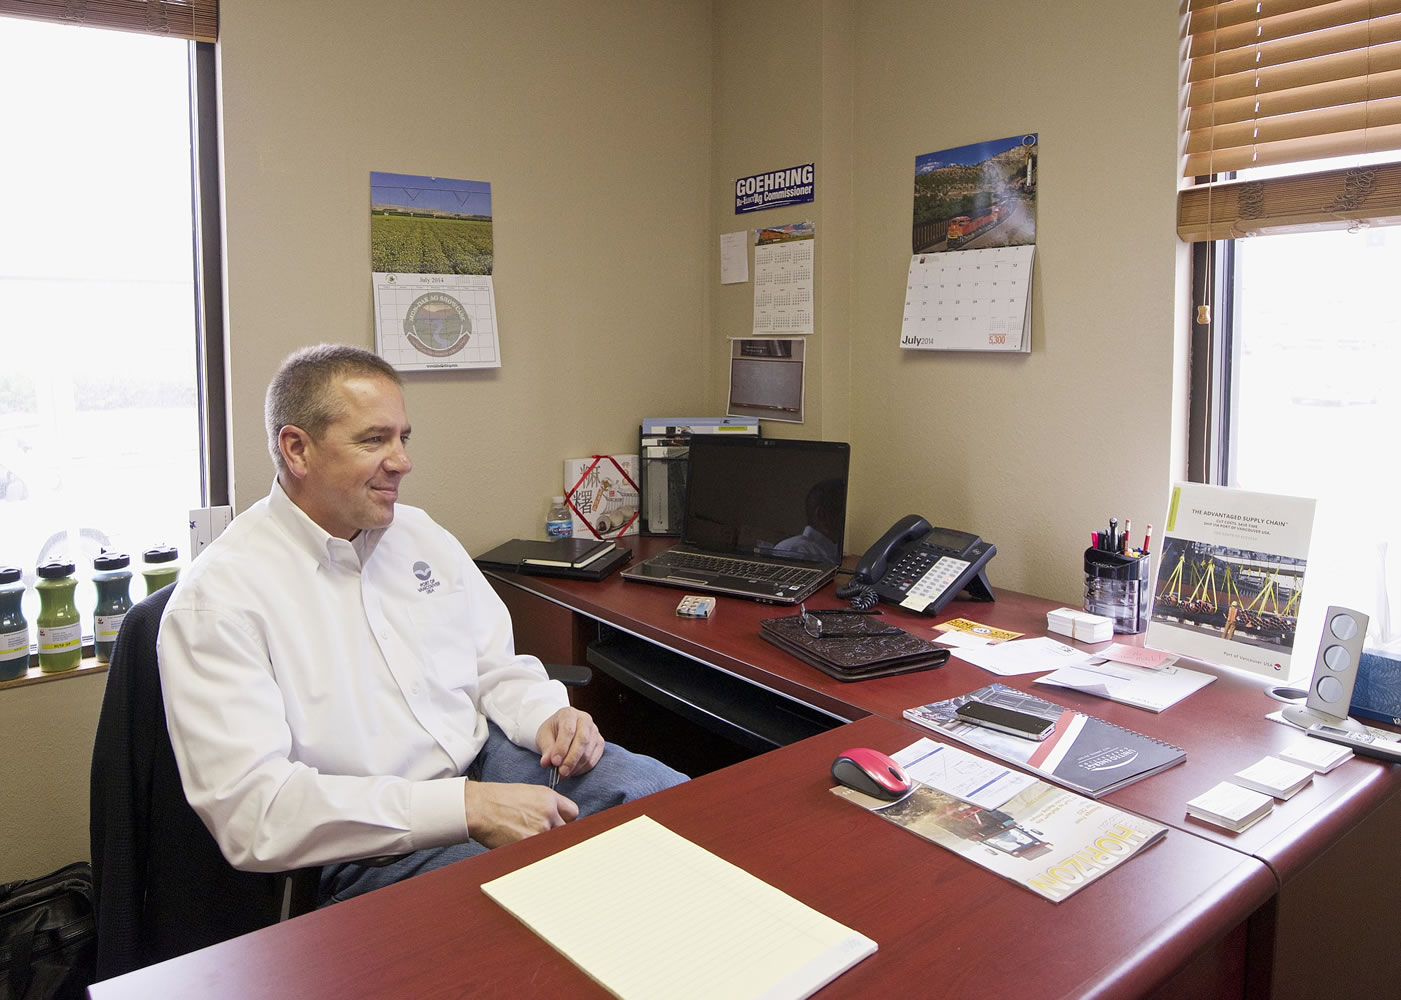 Curtis Shuck, senior sales director for the Port of Vancouver, talks to The Columbian inside the port's Williston, N.D. office on  Aug.